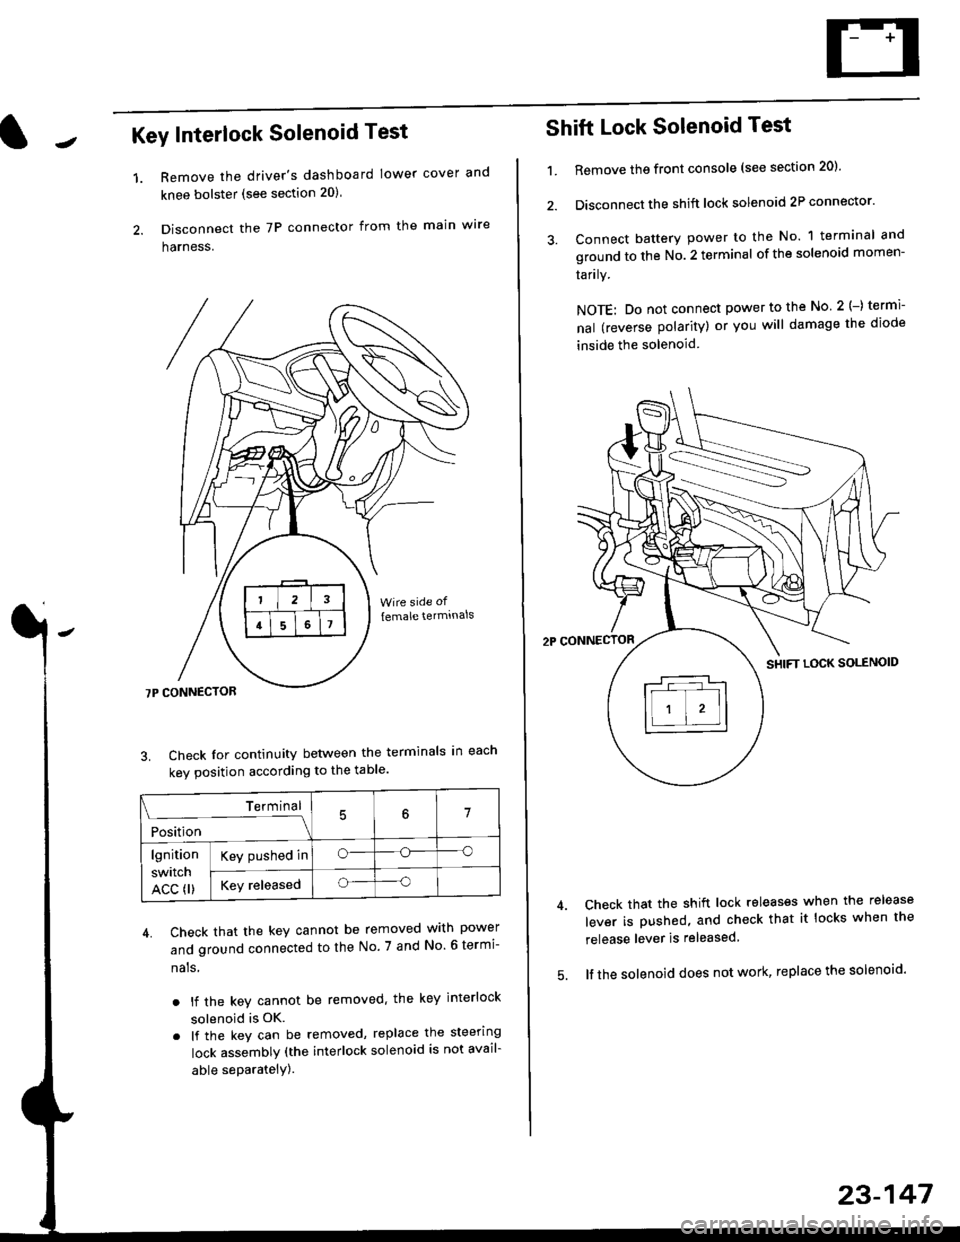 HONDA CIVIC 1997 6.G Workshop Manual Key Interlock Solenoid Test
Remove the drivers dashboard lower cover and
knee bolster (see section 20)
Disconnect the 7P connector from the main wre
harness.
3. Check Ior continuity between the term